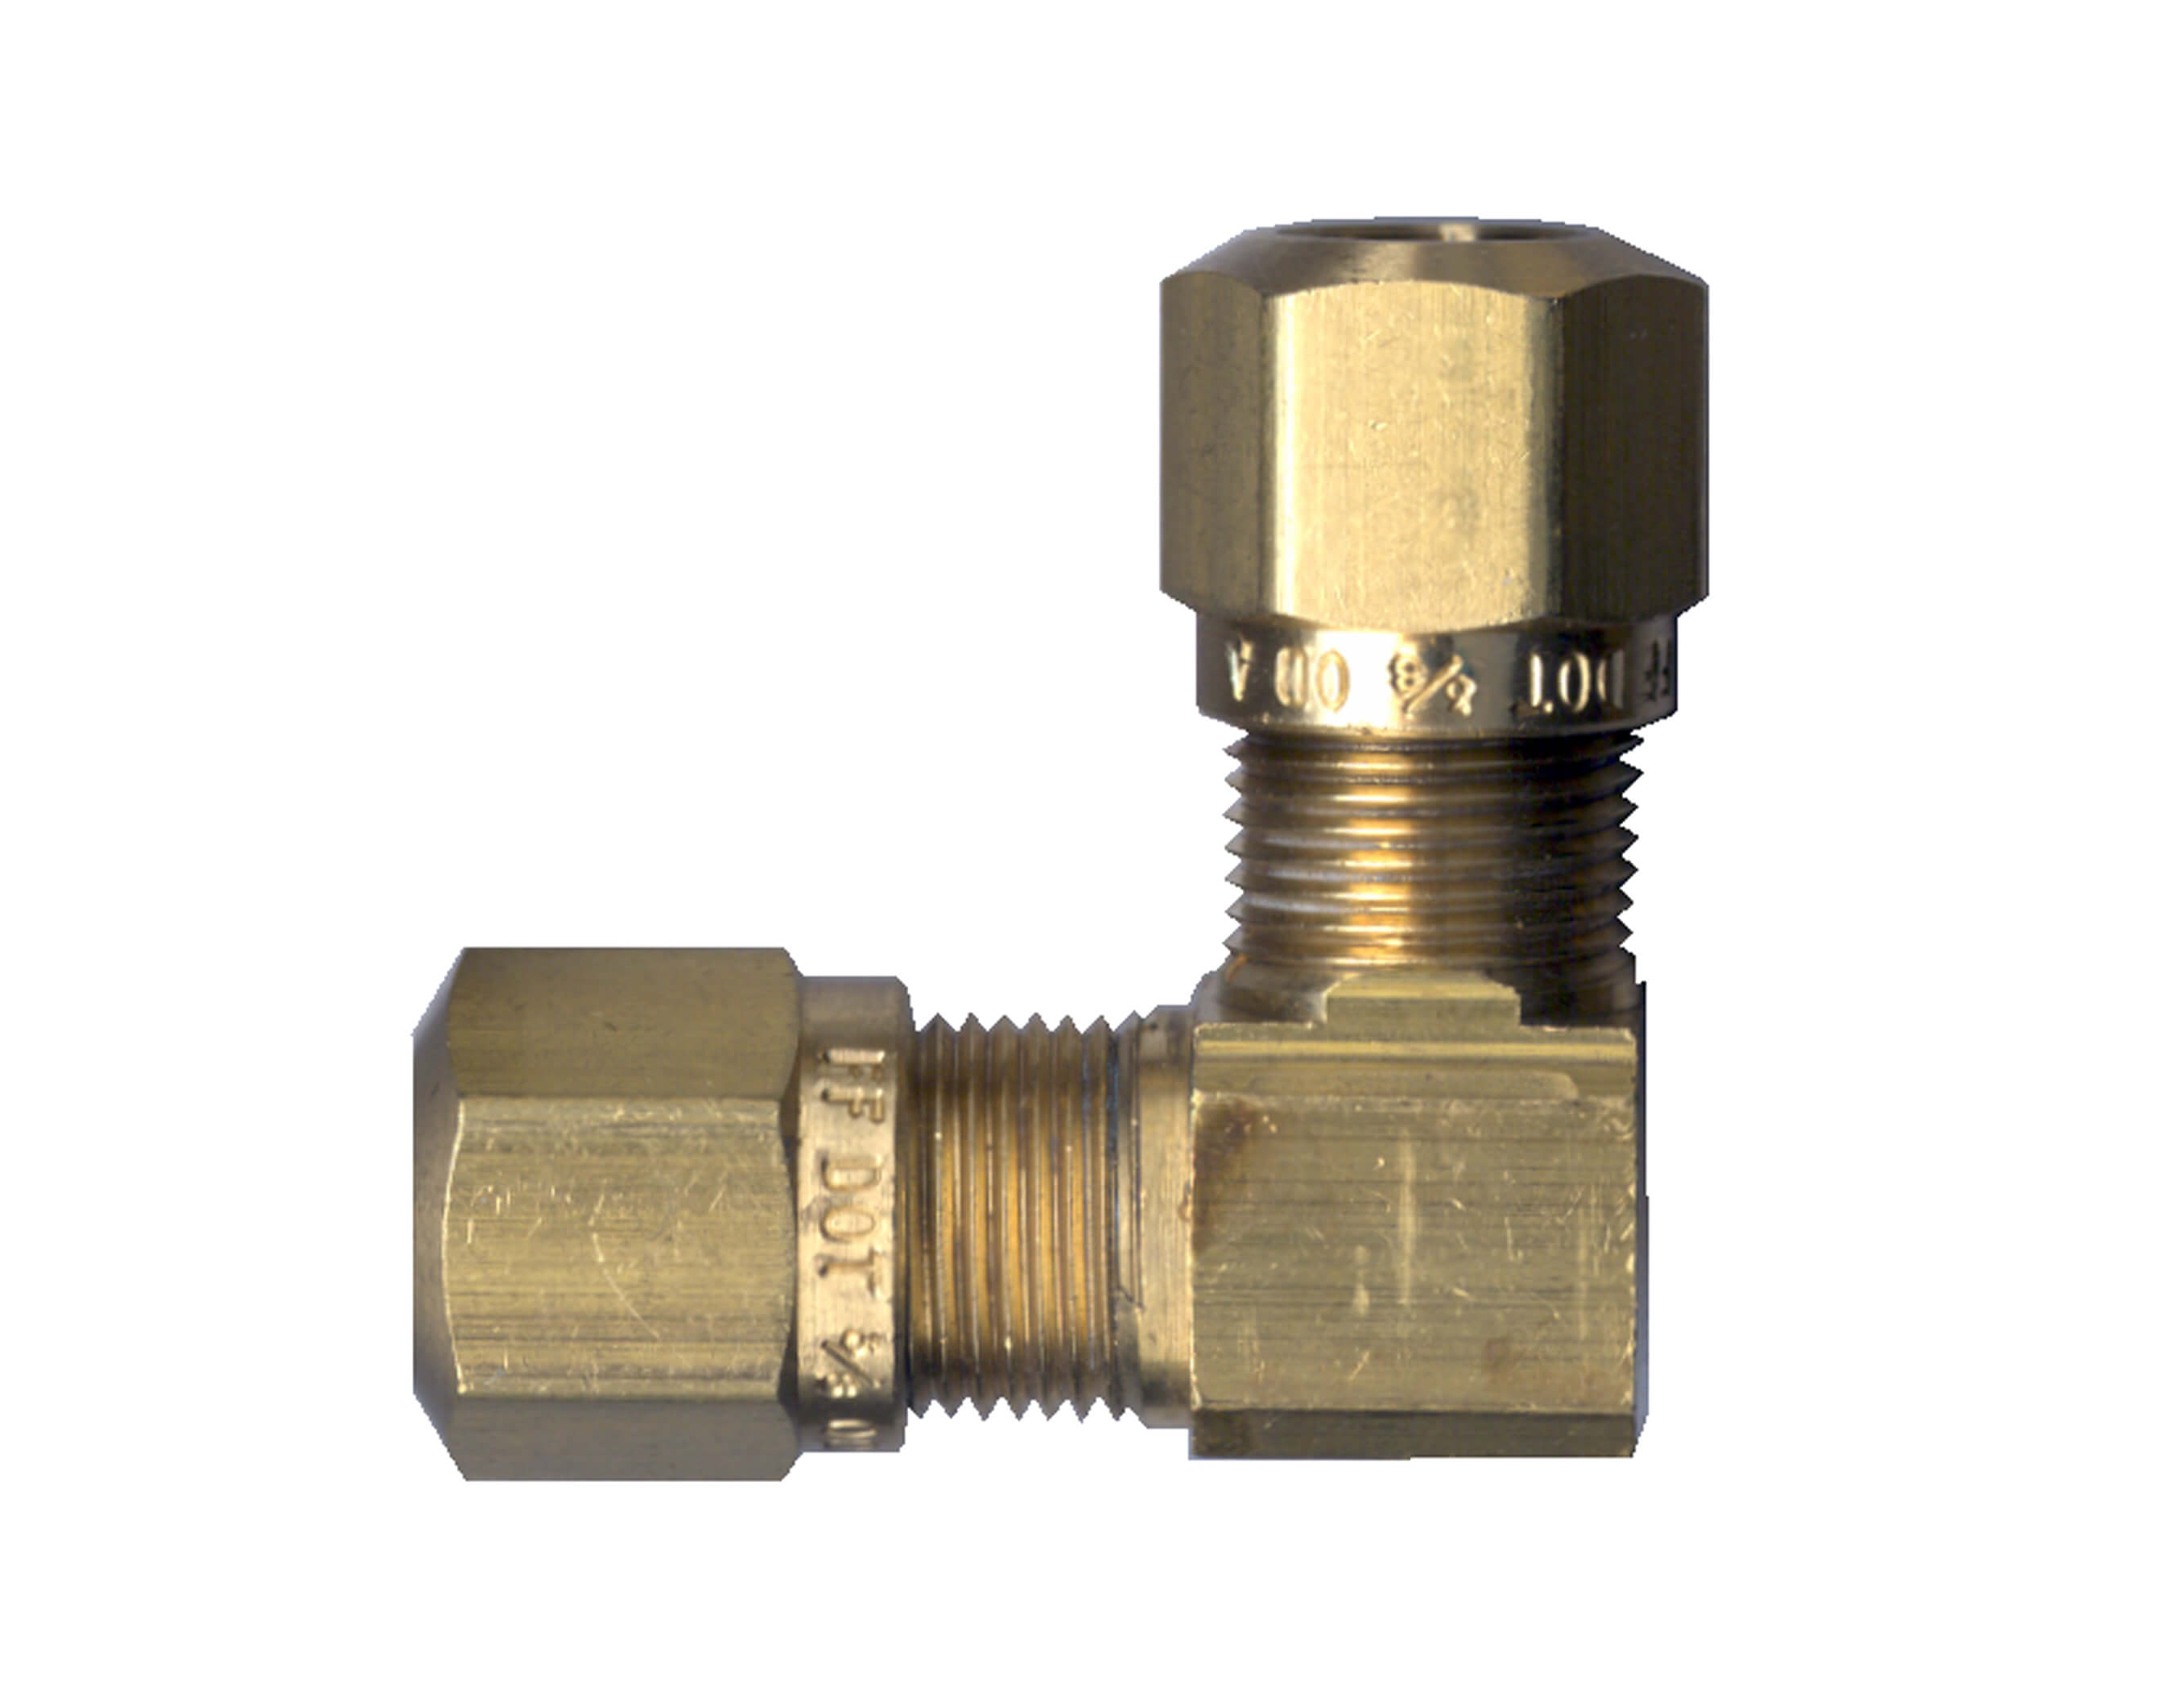 Brass DOT 45° Compression Elbow